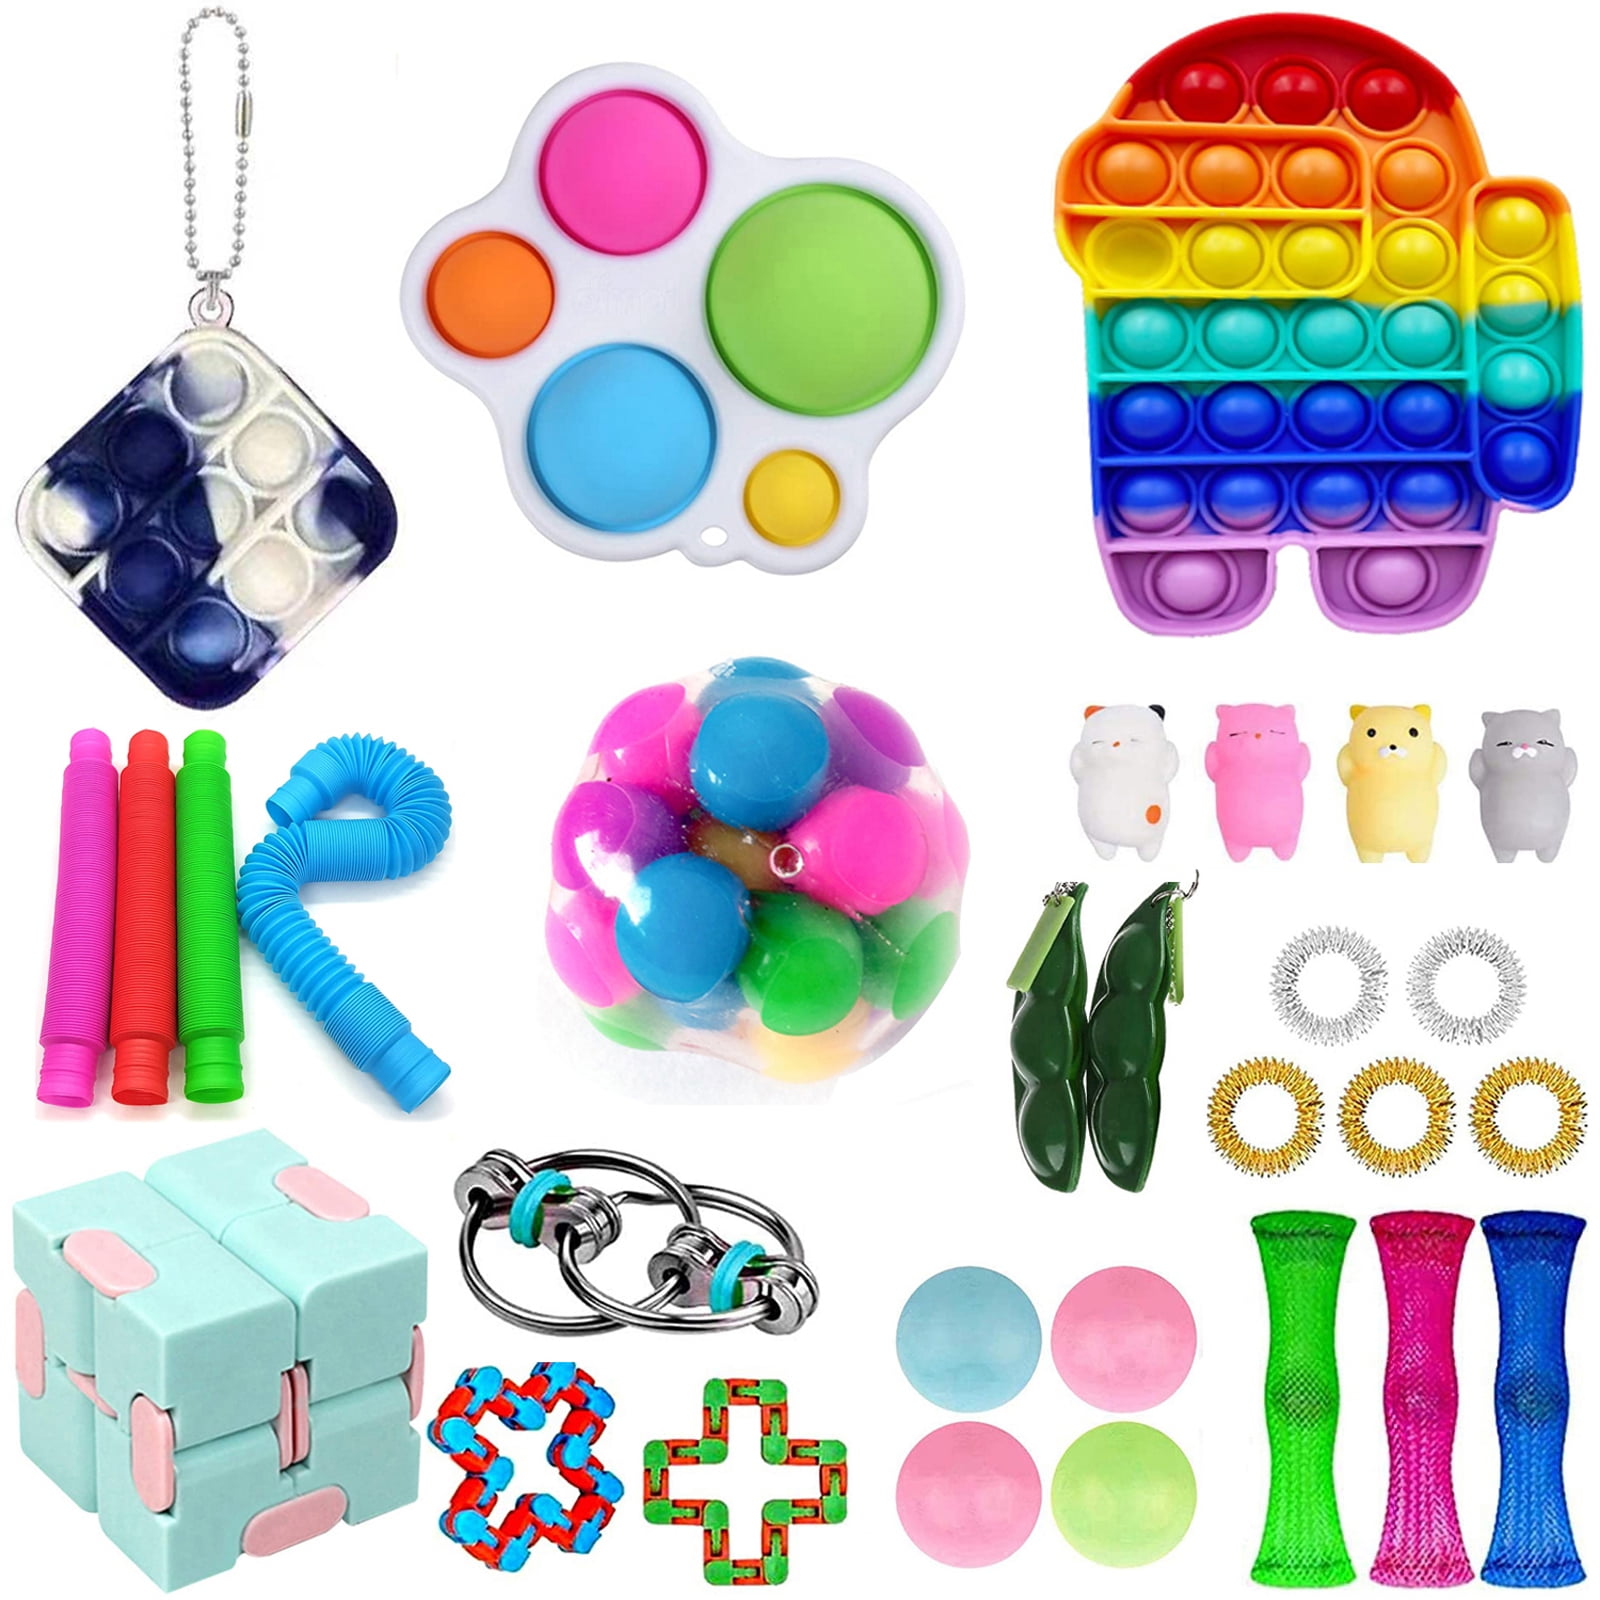 Sensory Fidget Toys Set 27pcs Stress Relief and Anti-Anxiety Tools Bundle for 